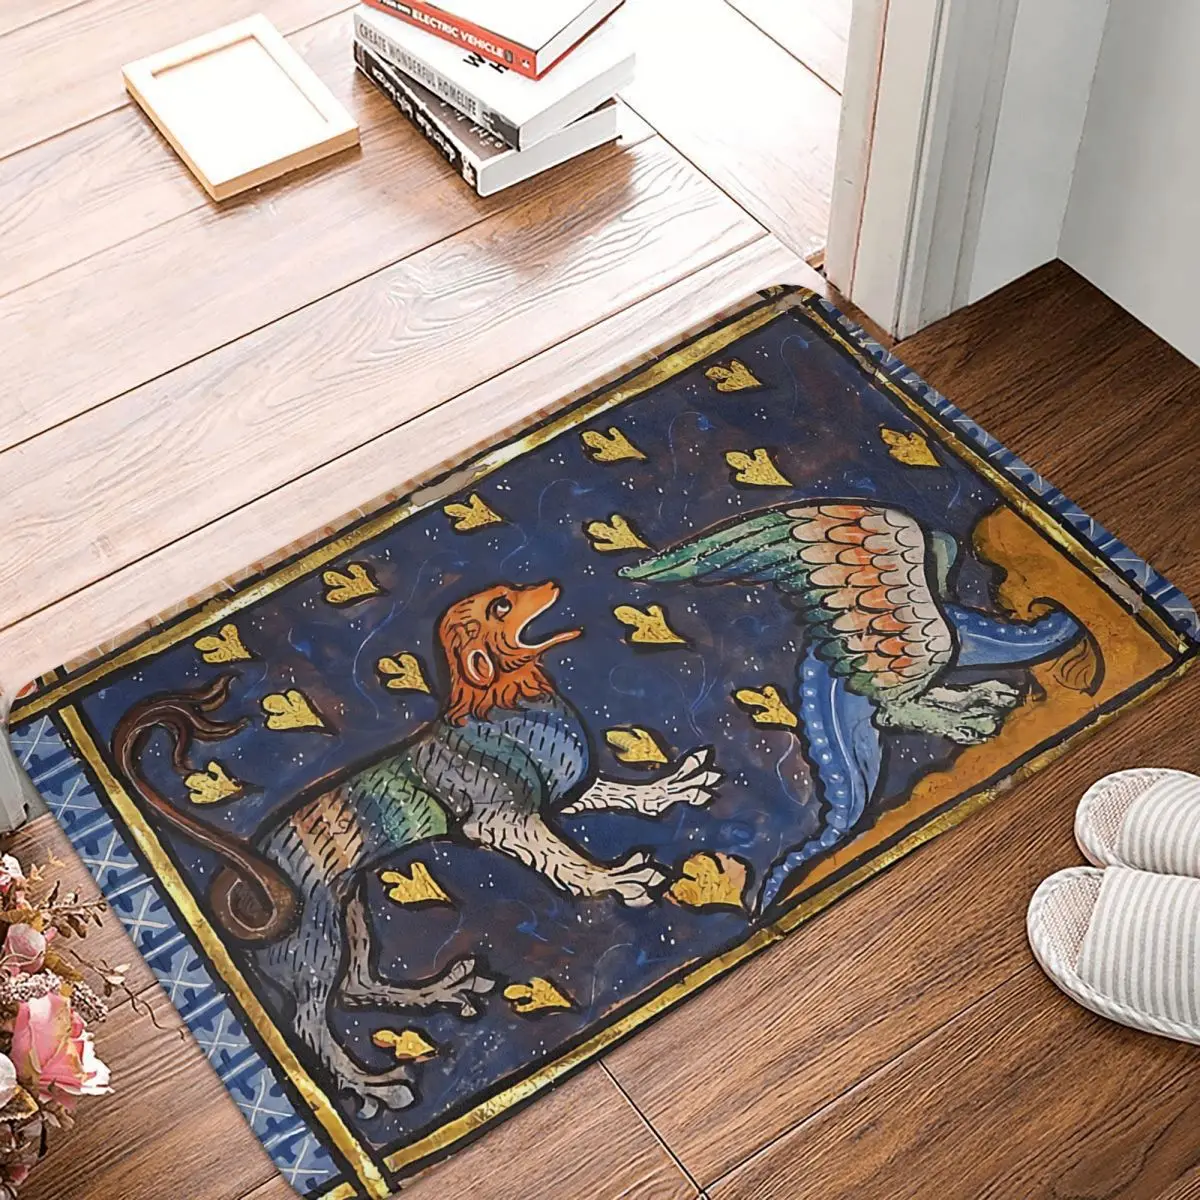 

Ancient Kitchen Non-Slip Carpet THE LION AND DRAGON Medieval Bestiary Bedroom Mat Welcome Doormat Floor Decoration Rug